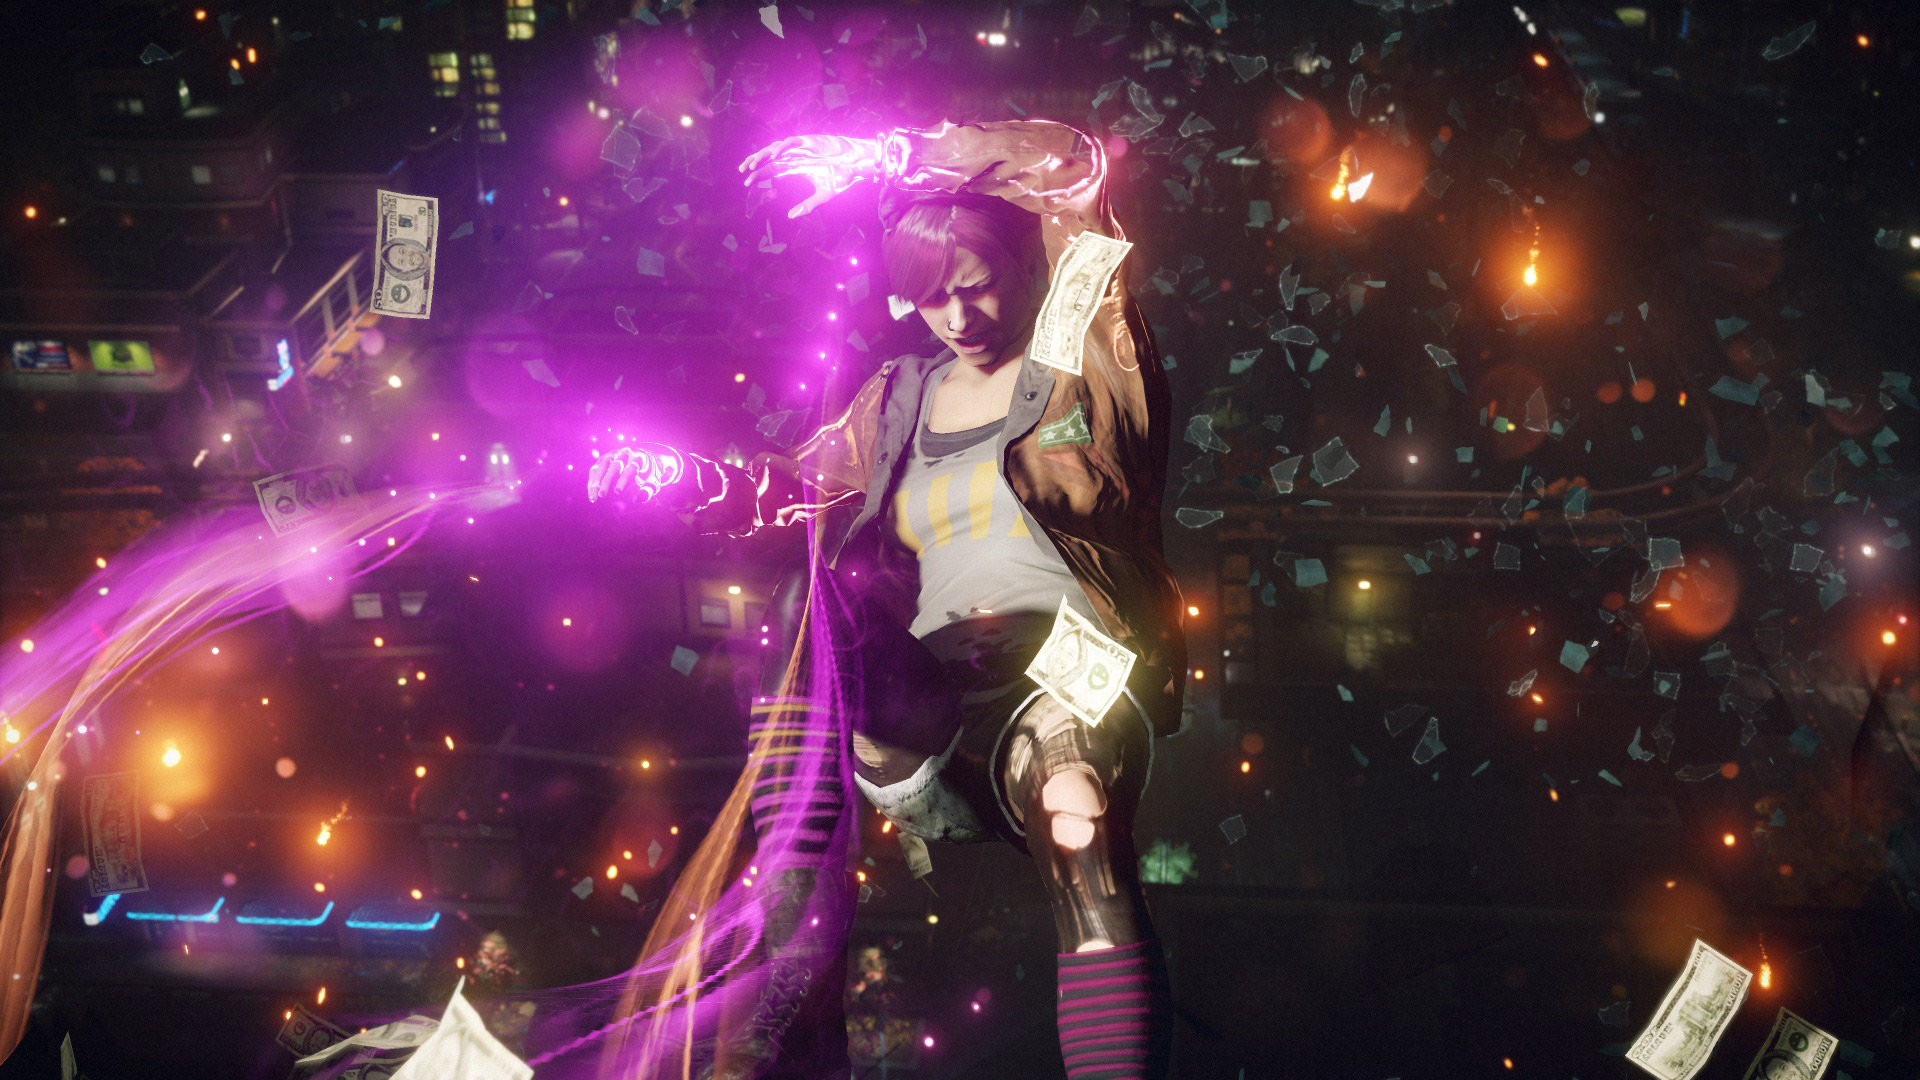 infamous first light second son